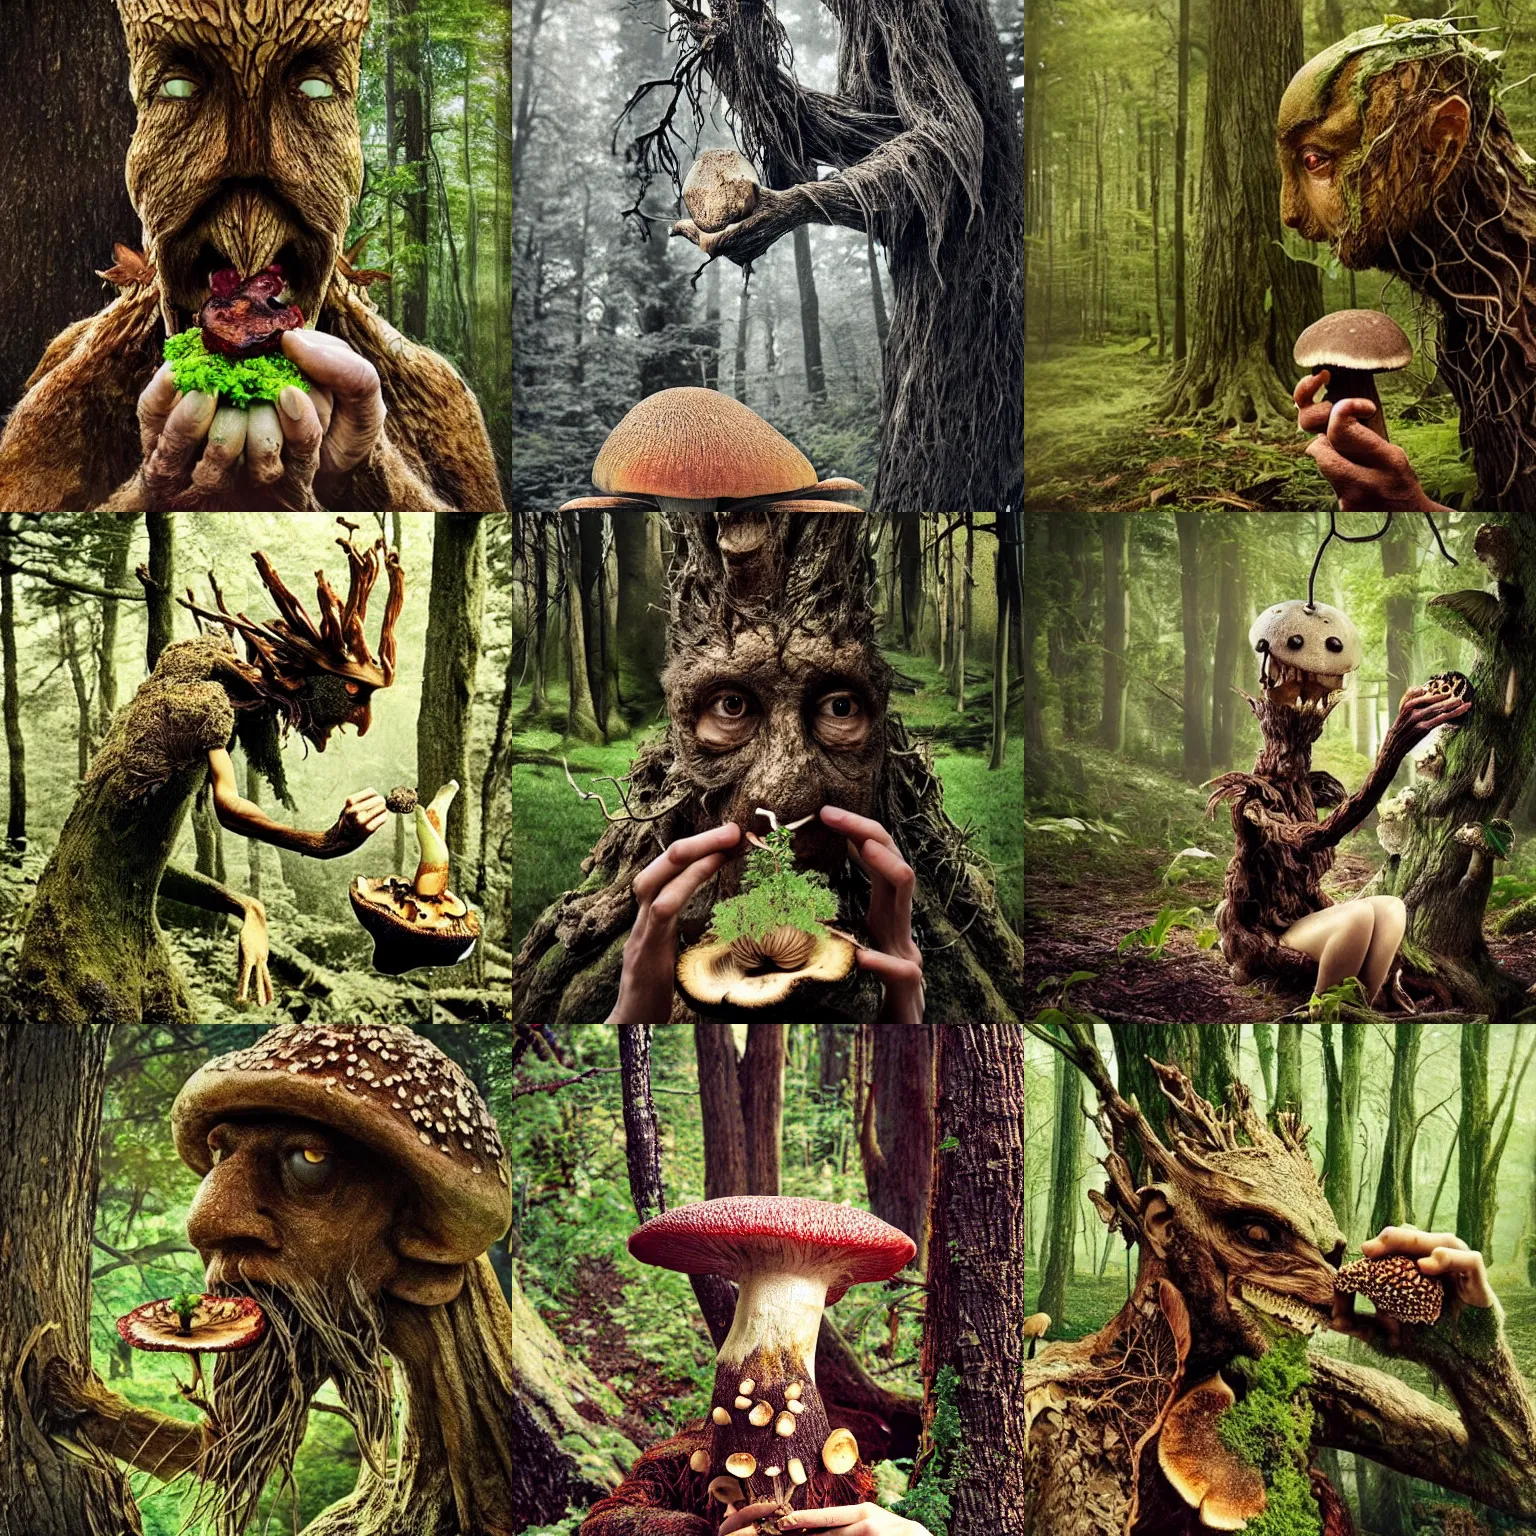 Prompt: photograph of a hungry treebeard savagely eating a mushroom 🍄